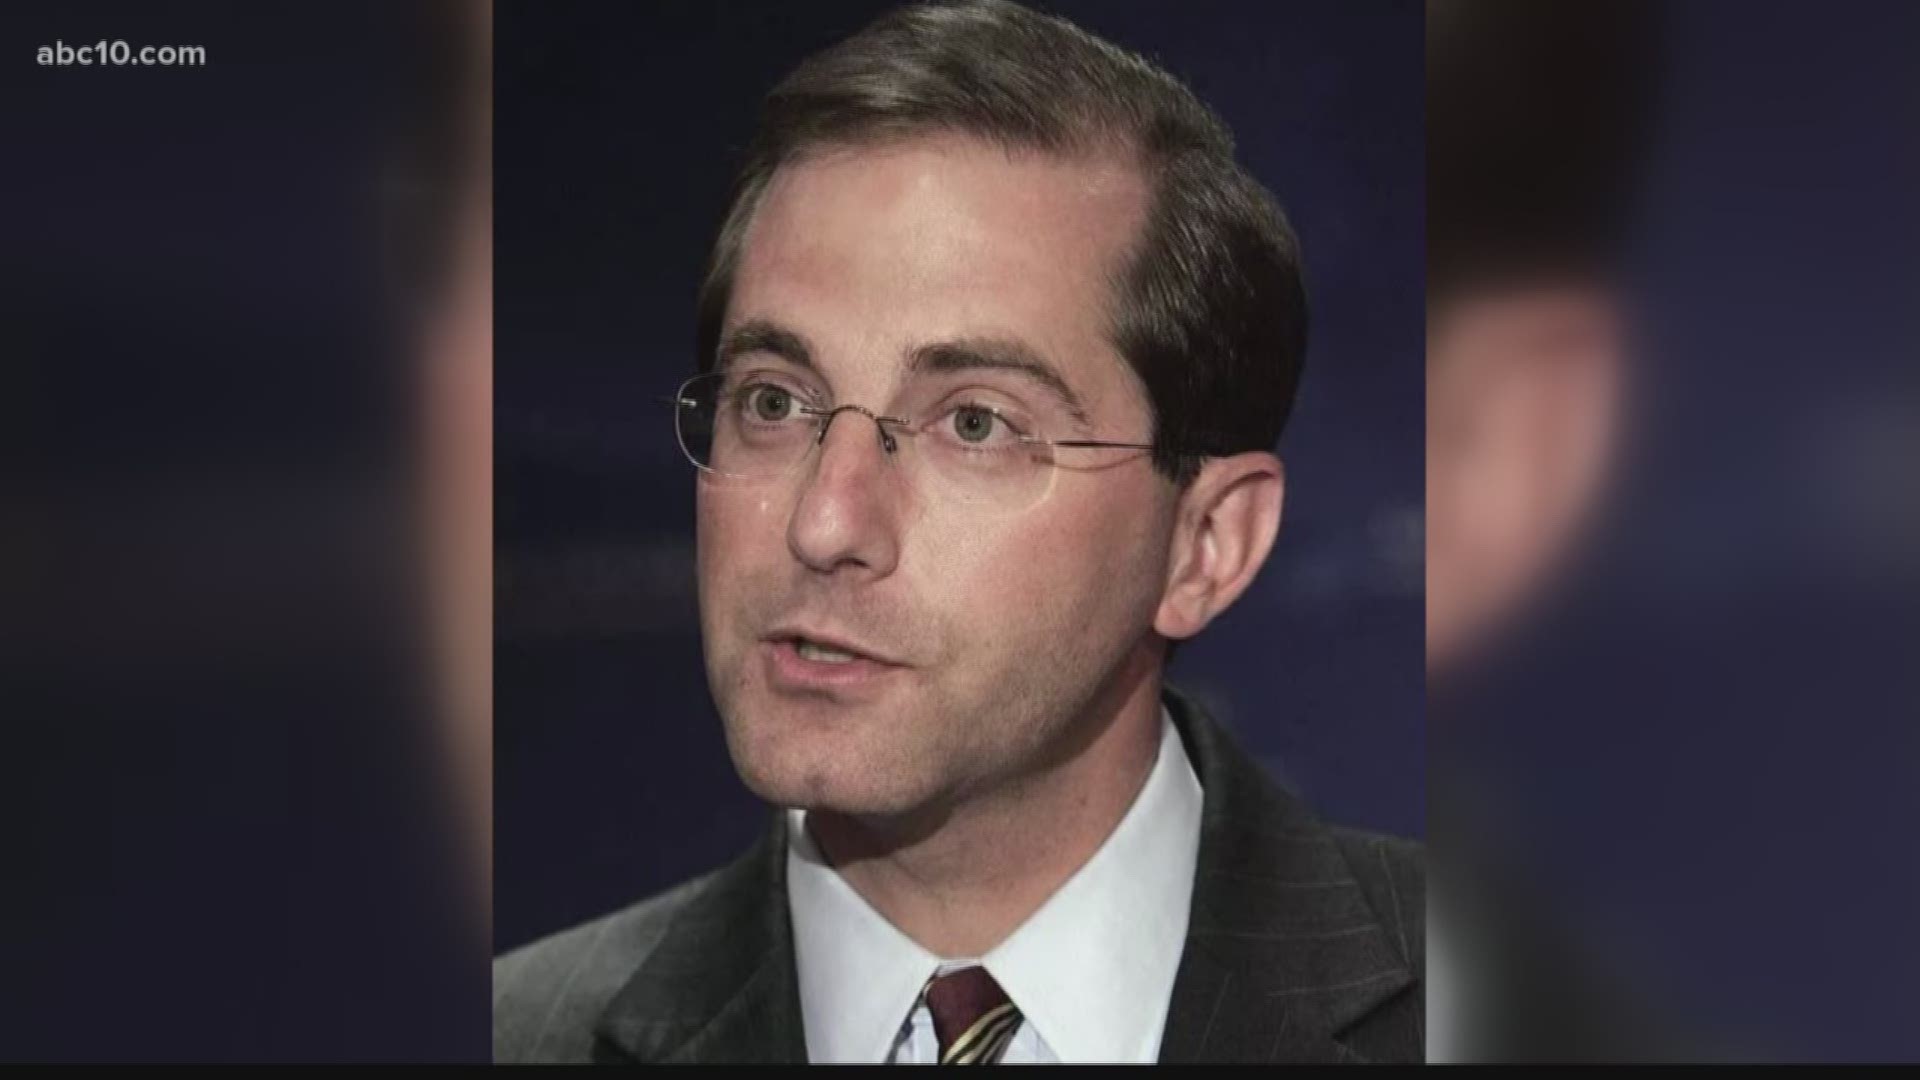 President Trump is nominating Alex Azar, who is a former top pharmaceutical and government executive.